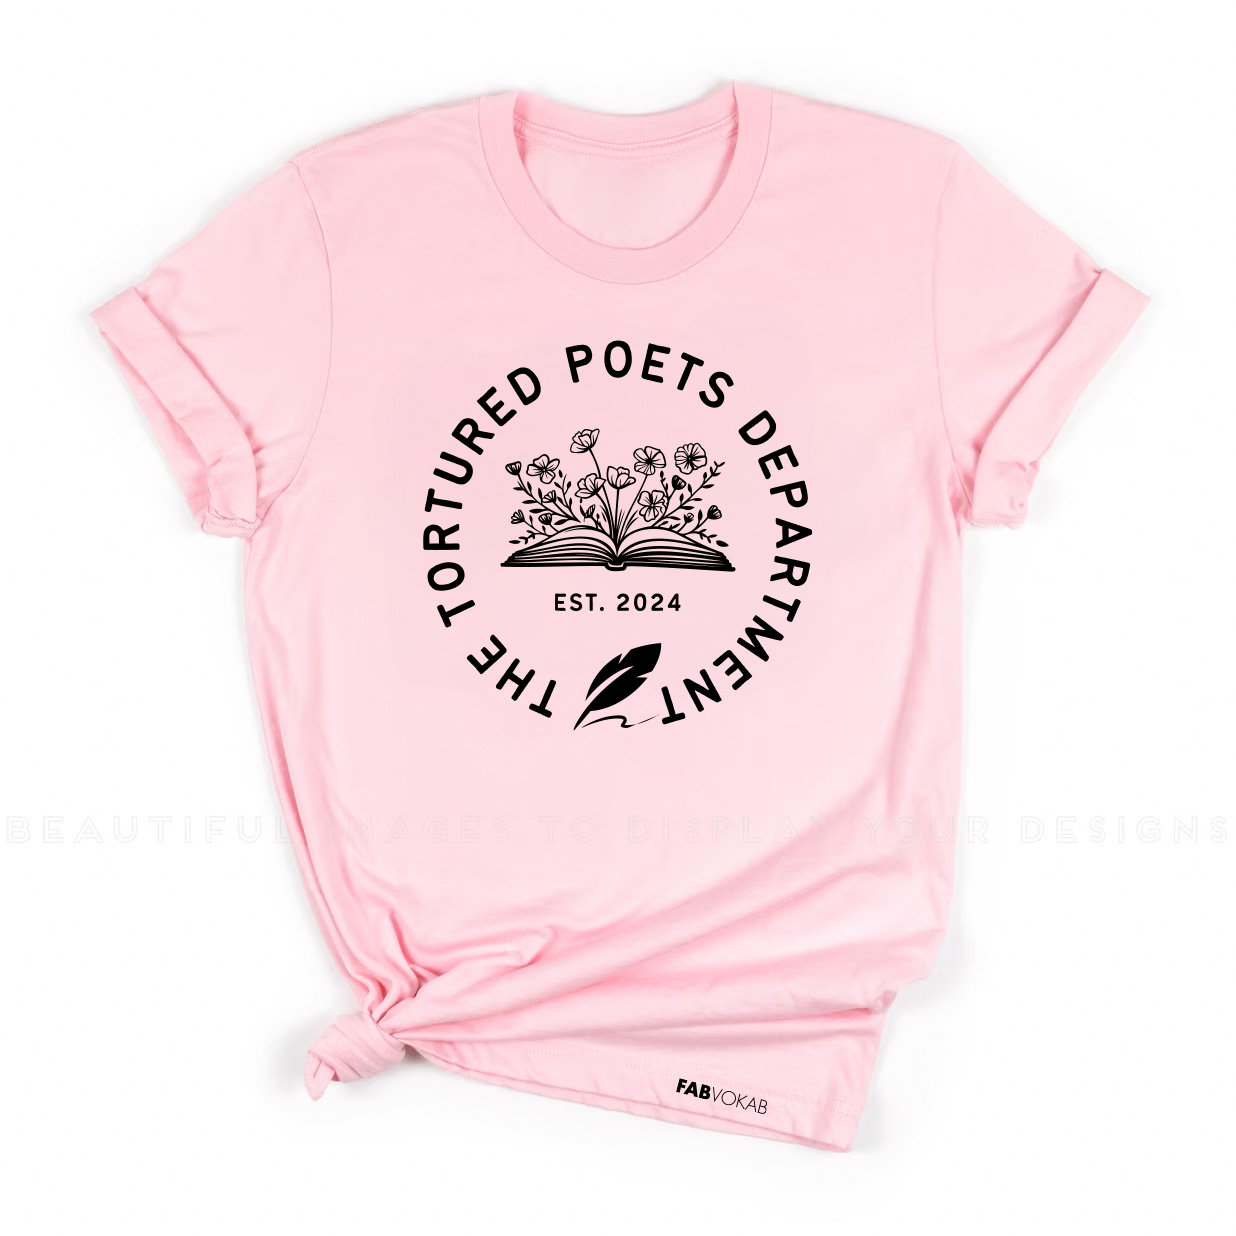 The Tortured Poets Department Inspired Girls' T-shirt: A Tribute to Taylor Swift's 2024 Album